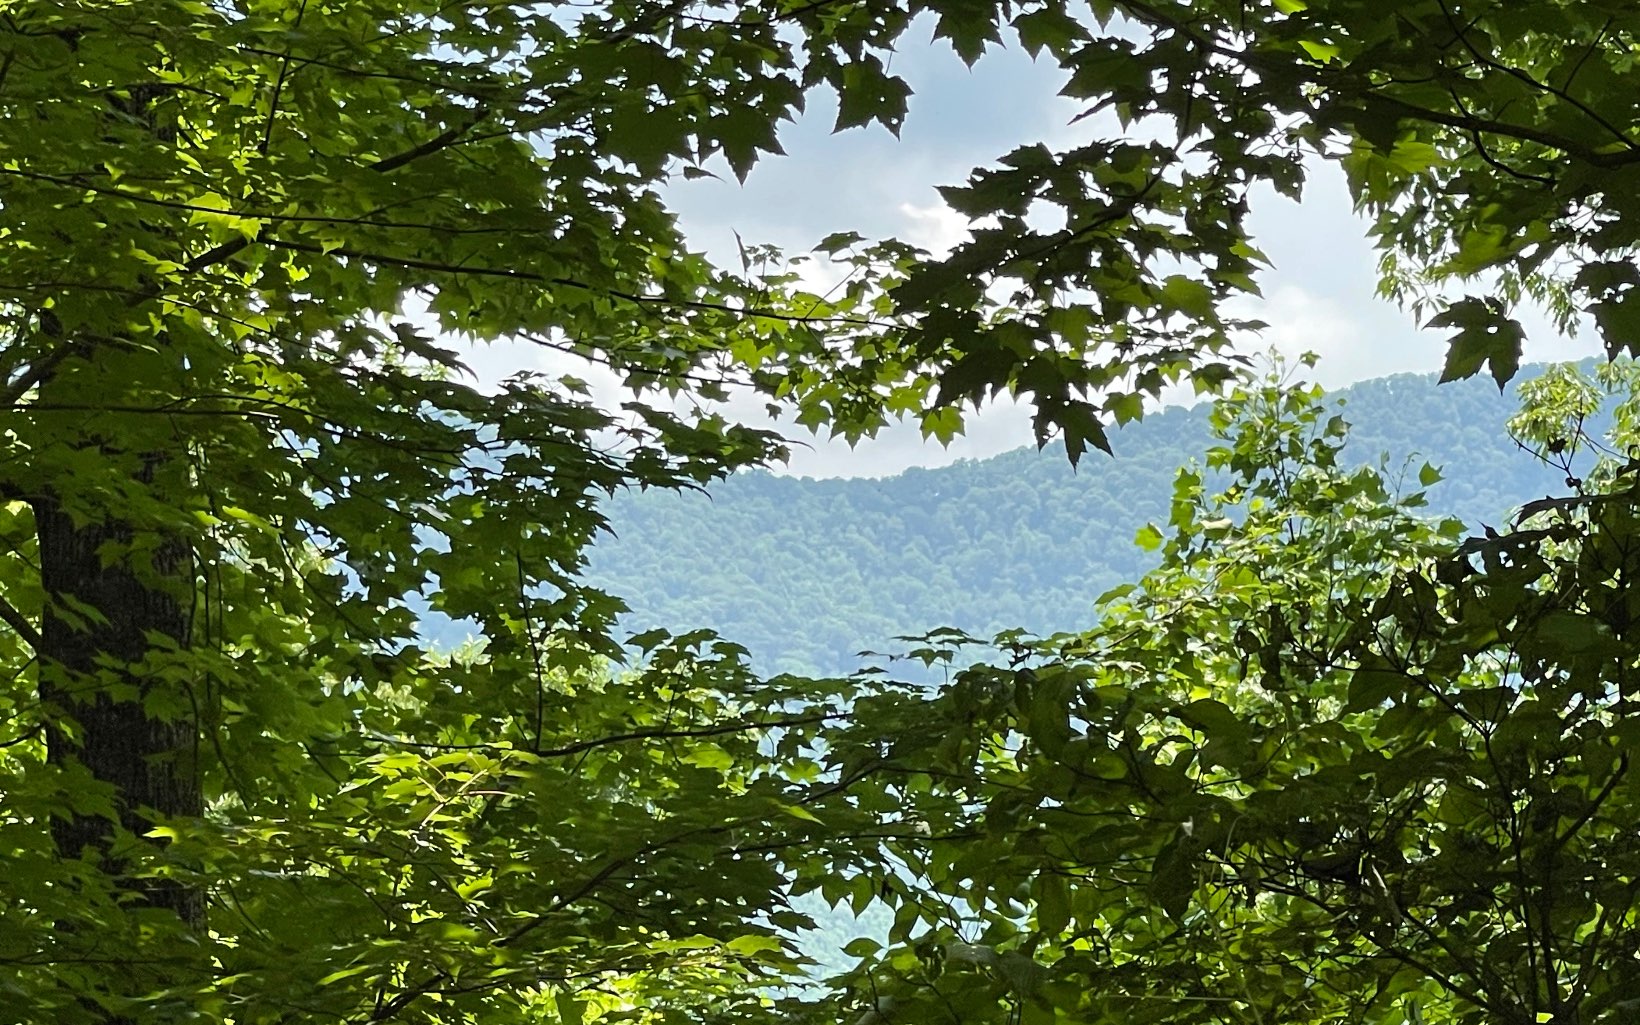 NORTH GEORGIA MOUNTAIN LOT!! This lot offers great long range views and is close to Young Harris College, Lake Chatuge and Brasstown Valley Resort. It's the perfect spot to build your own cabin in the North GA mountains.